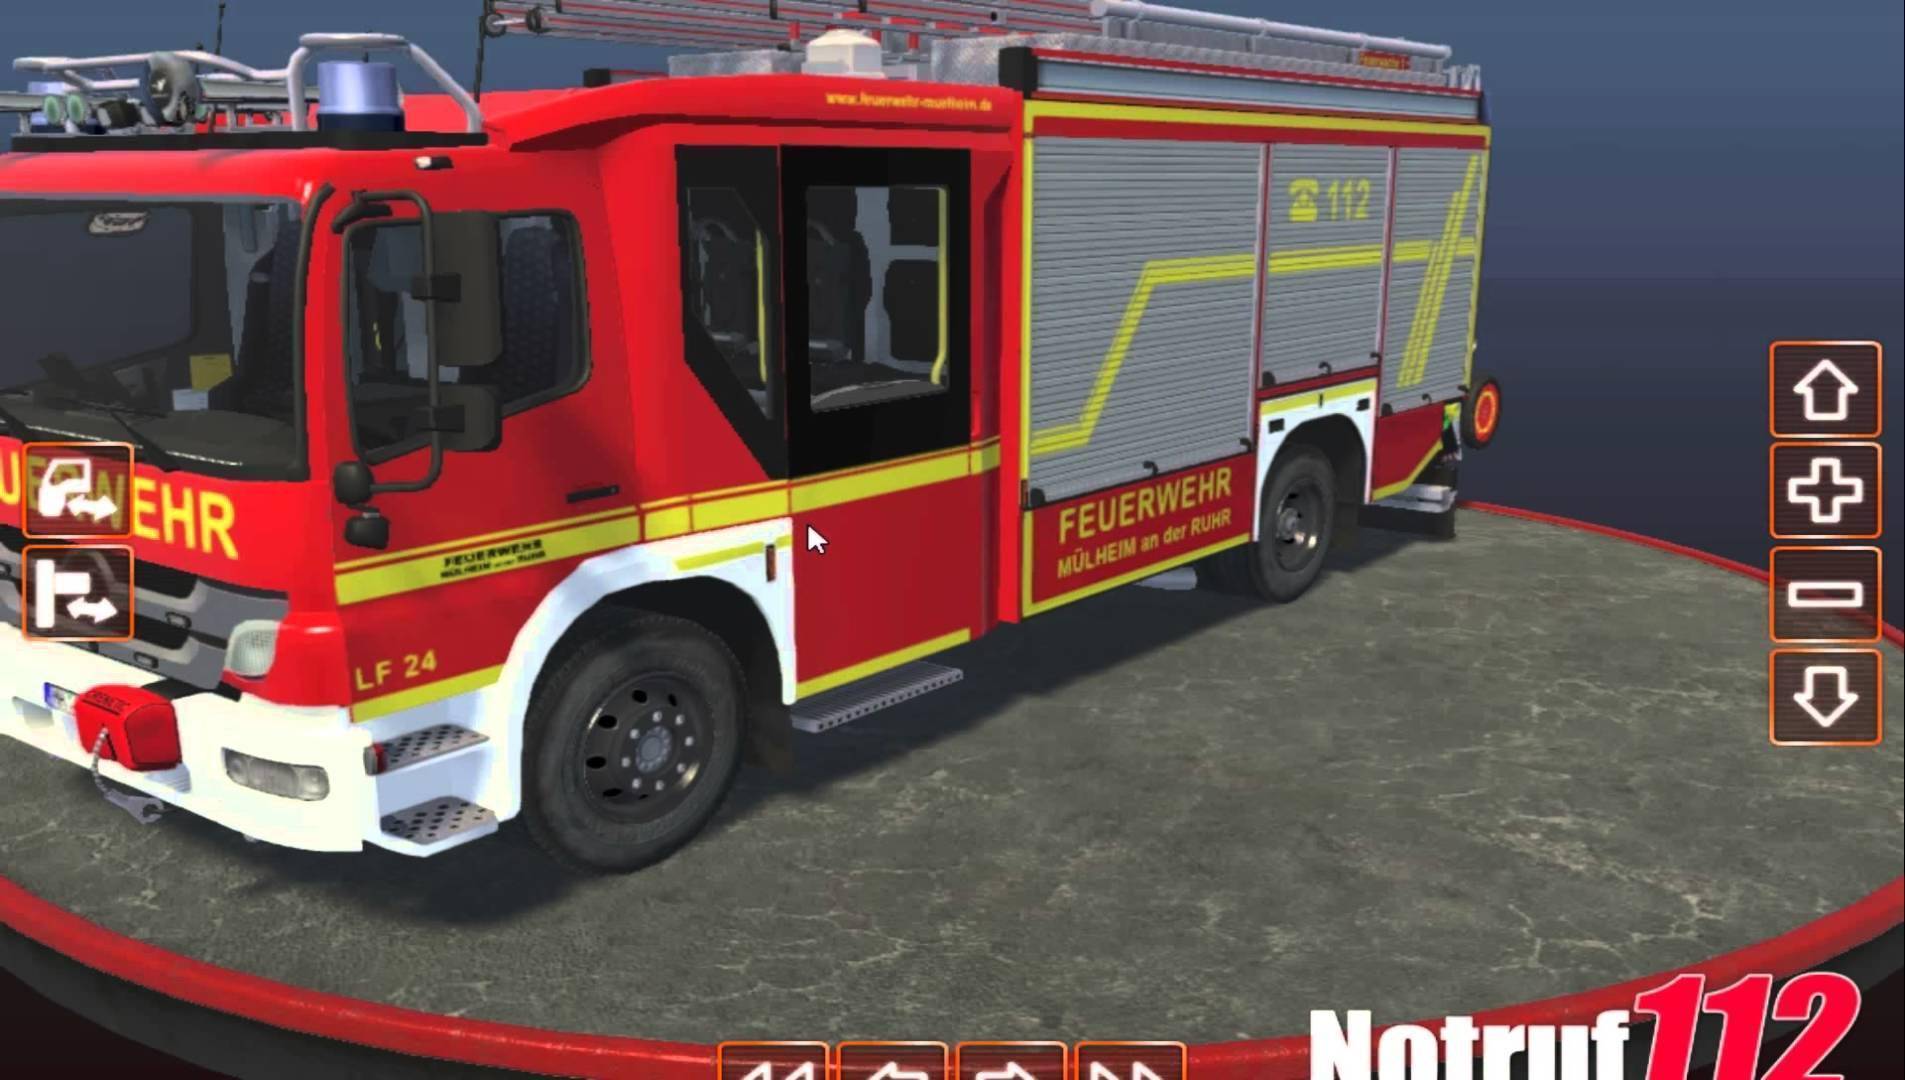 Emergency Call 112 The Fire Fighting Simulation (PC) Key cheap - Price of  $6.31 for Steam